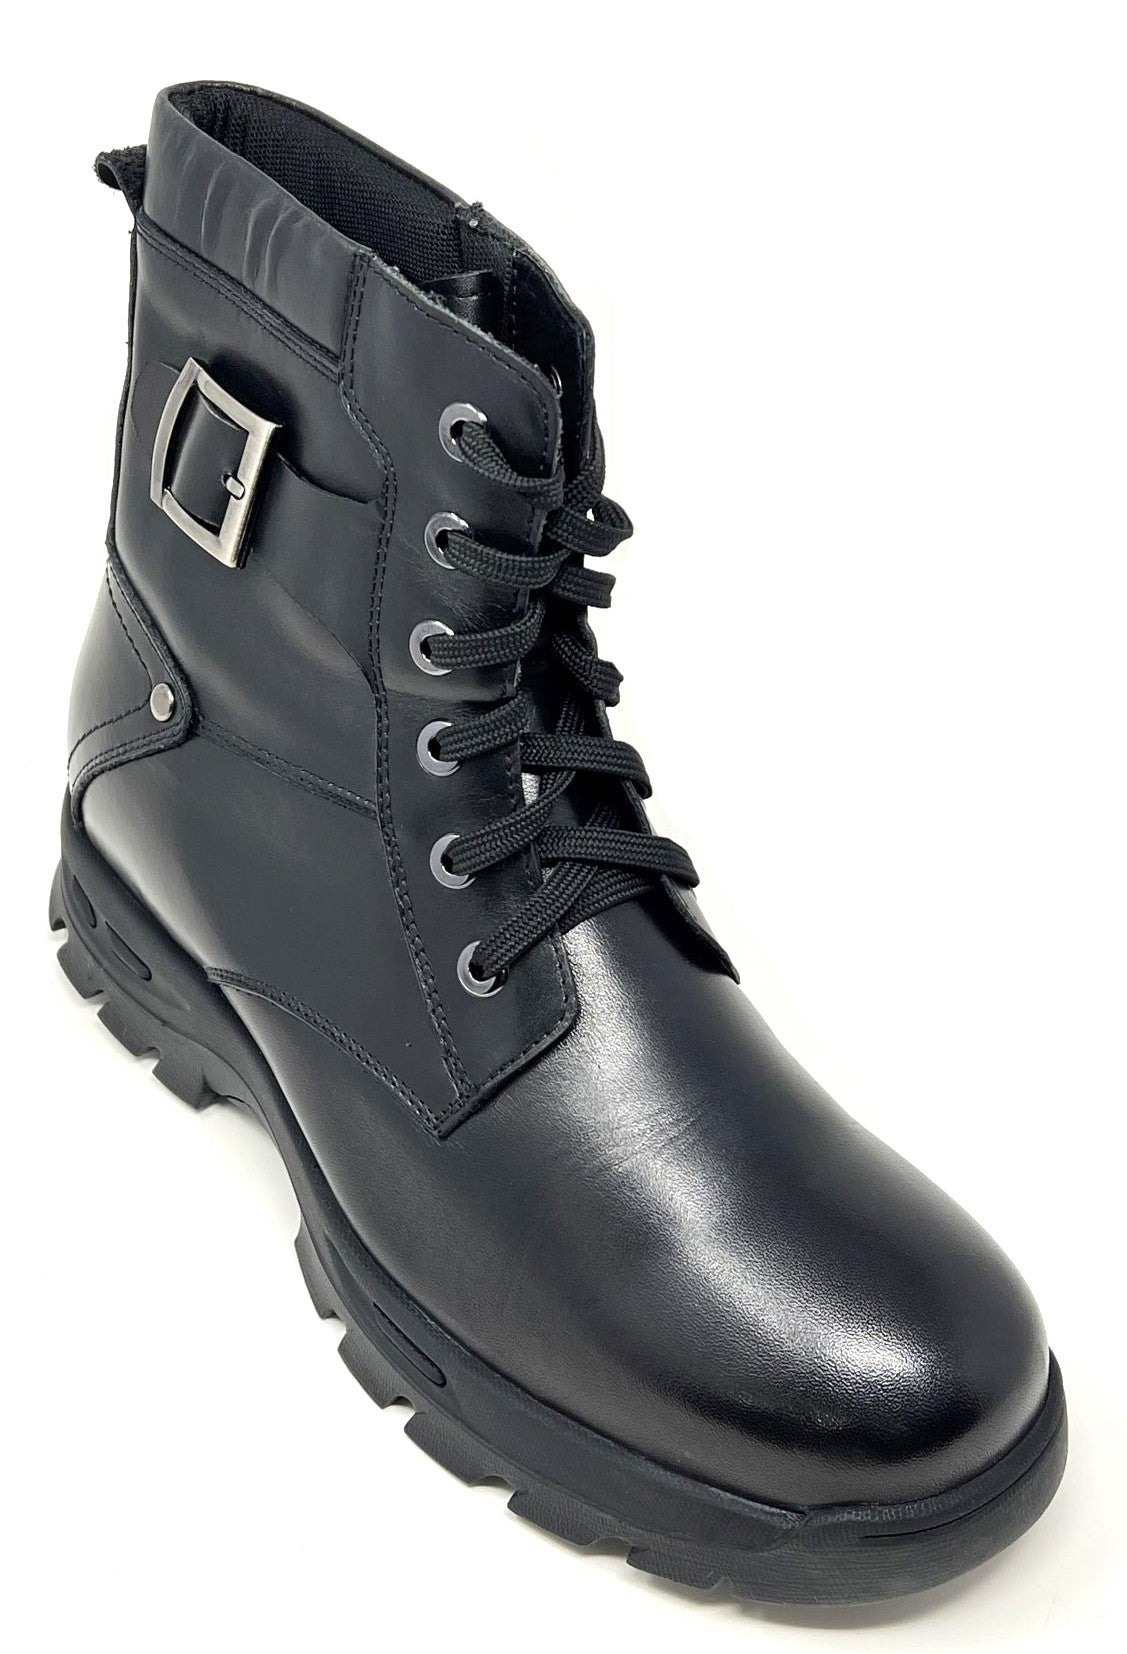 FSY0083 - 3.2 Inches Taller (Black) - Size 11.5 Only